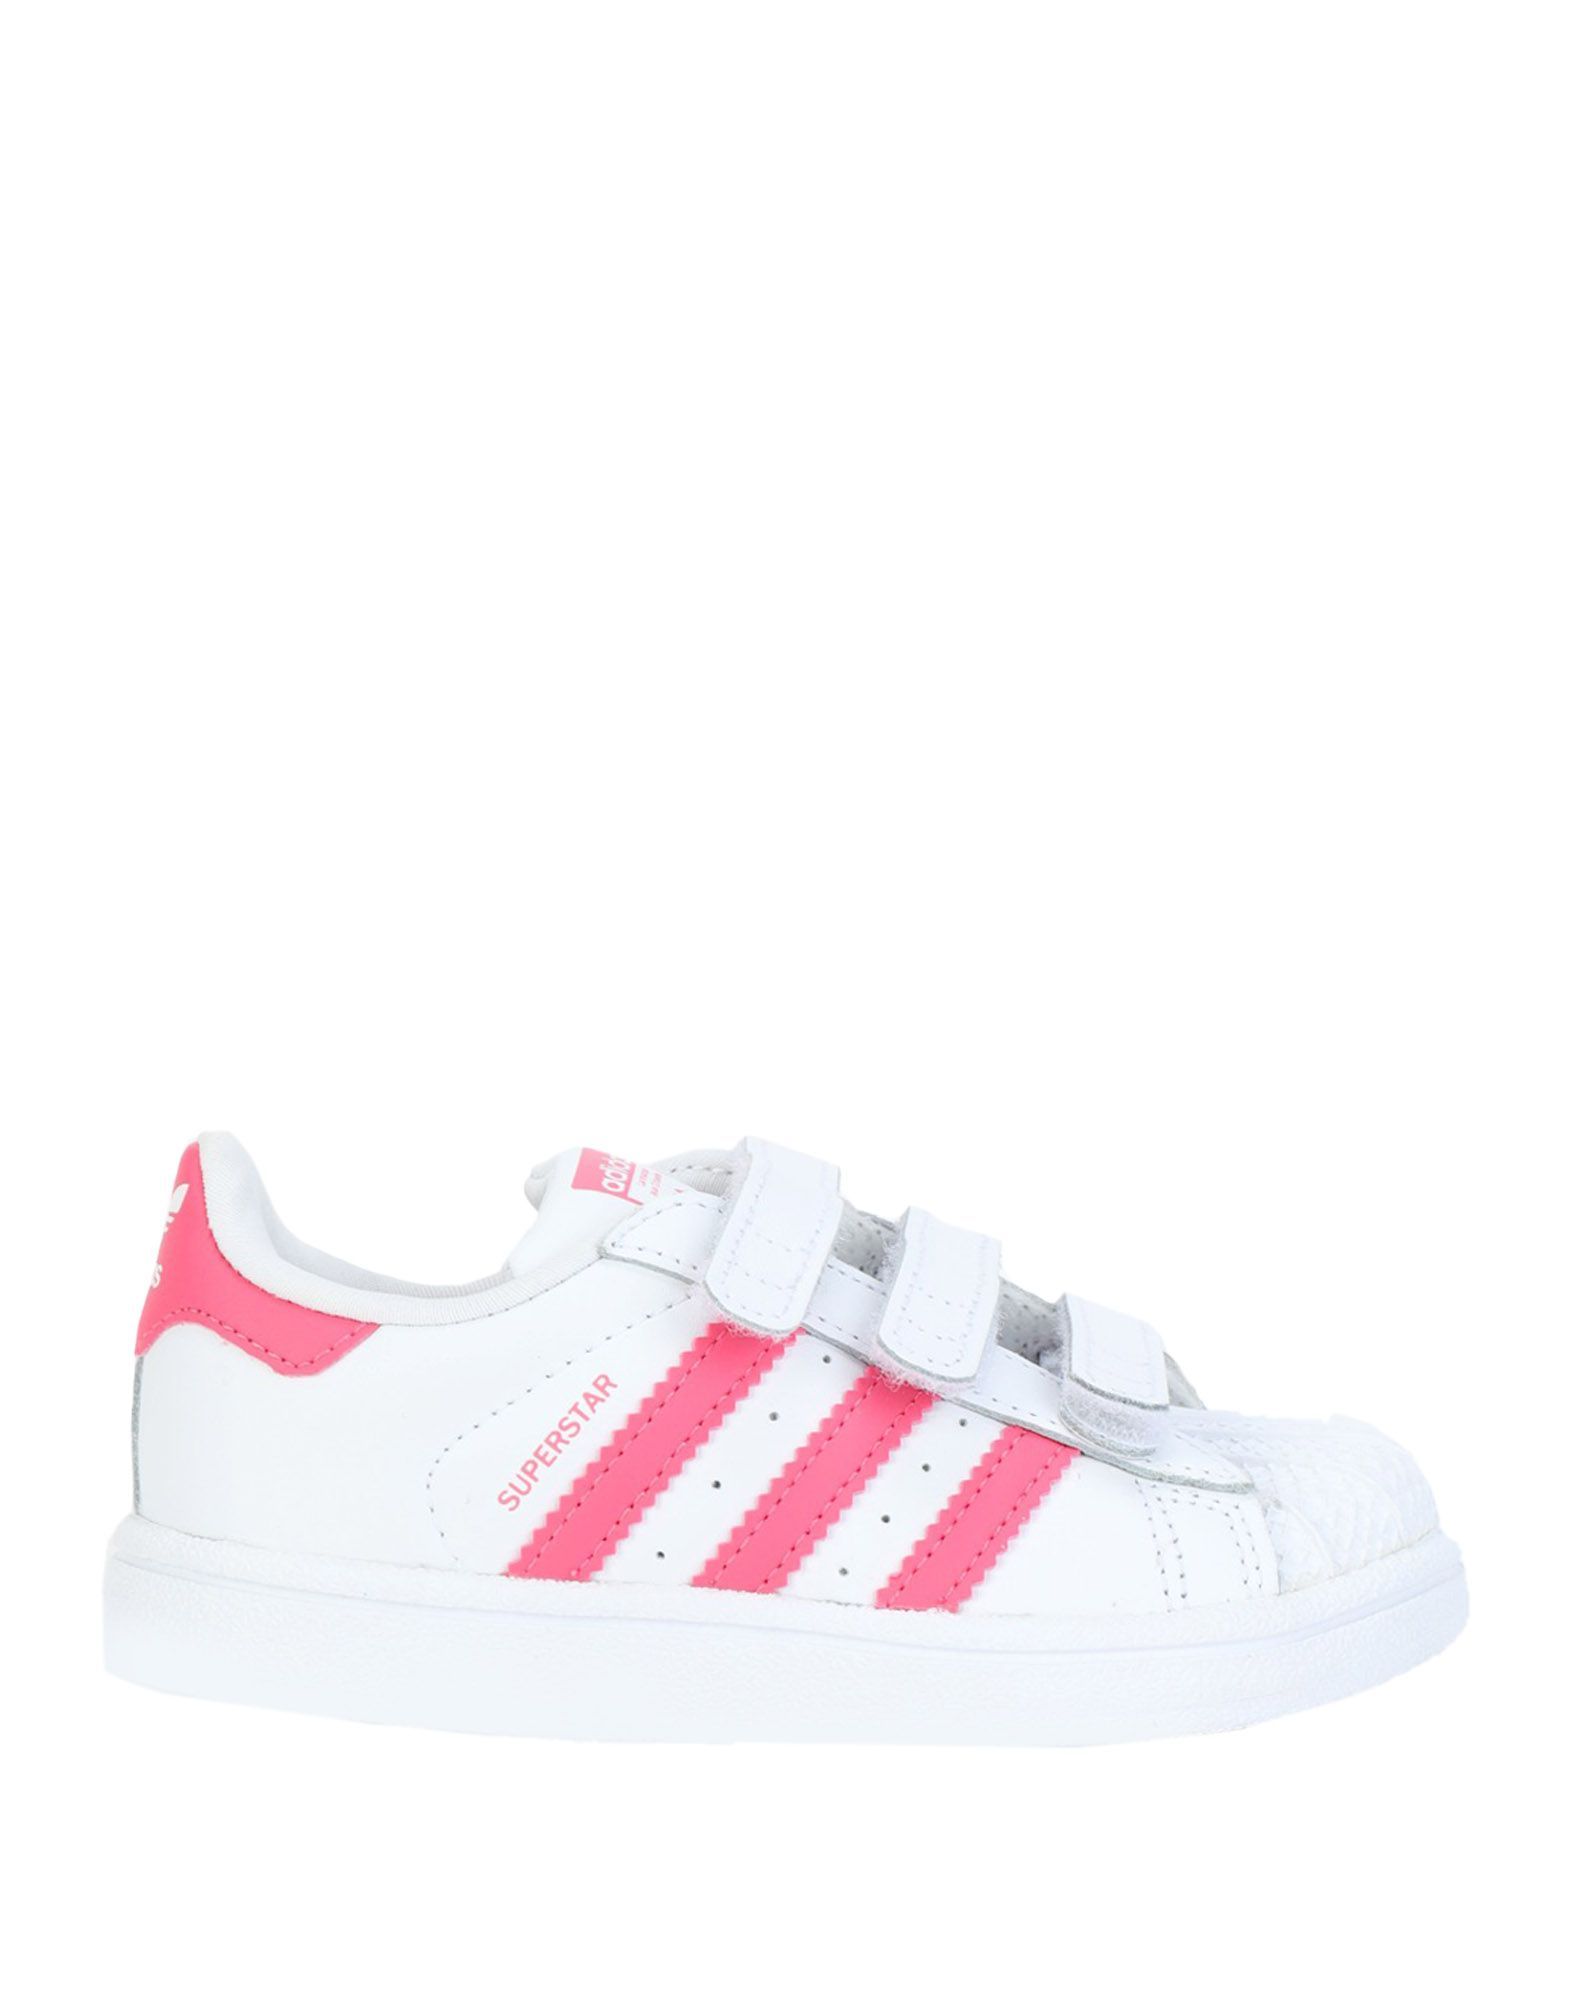 adidas Originals Girls' Trainers Leather in White